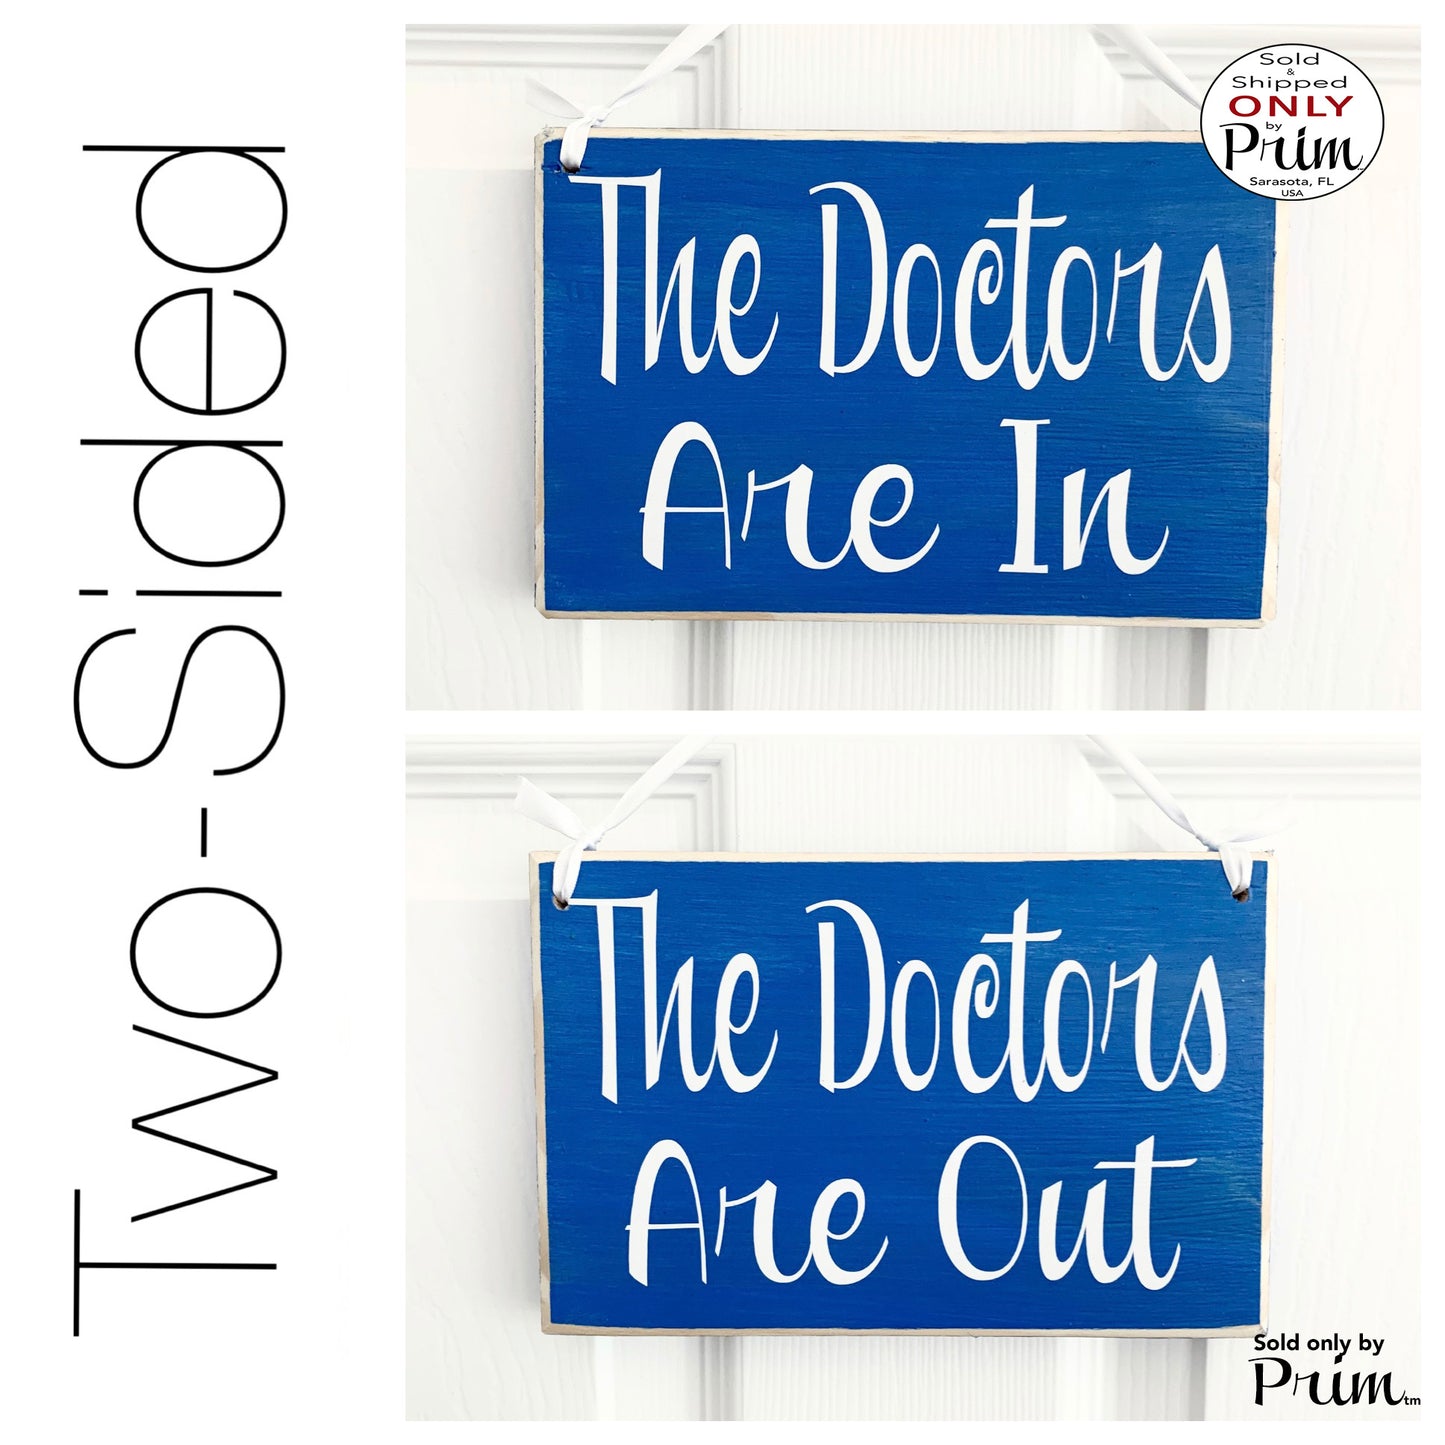 Designs by Prim 8x6 The Doctors are In Out Custom Wood Sign | Room Available With a Patient Please Do Not Disturb | Office Business Unavailable Door Plaque